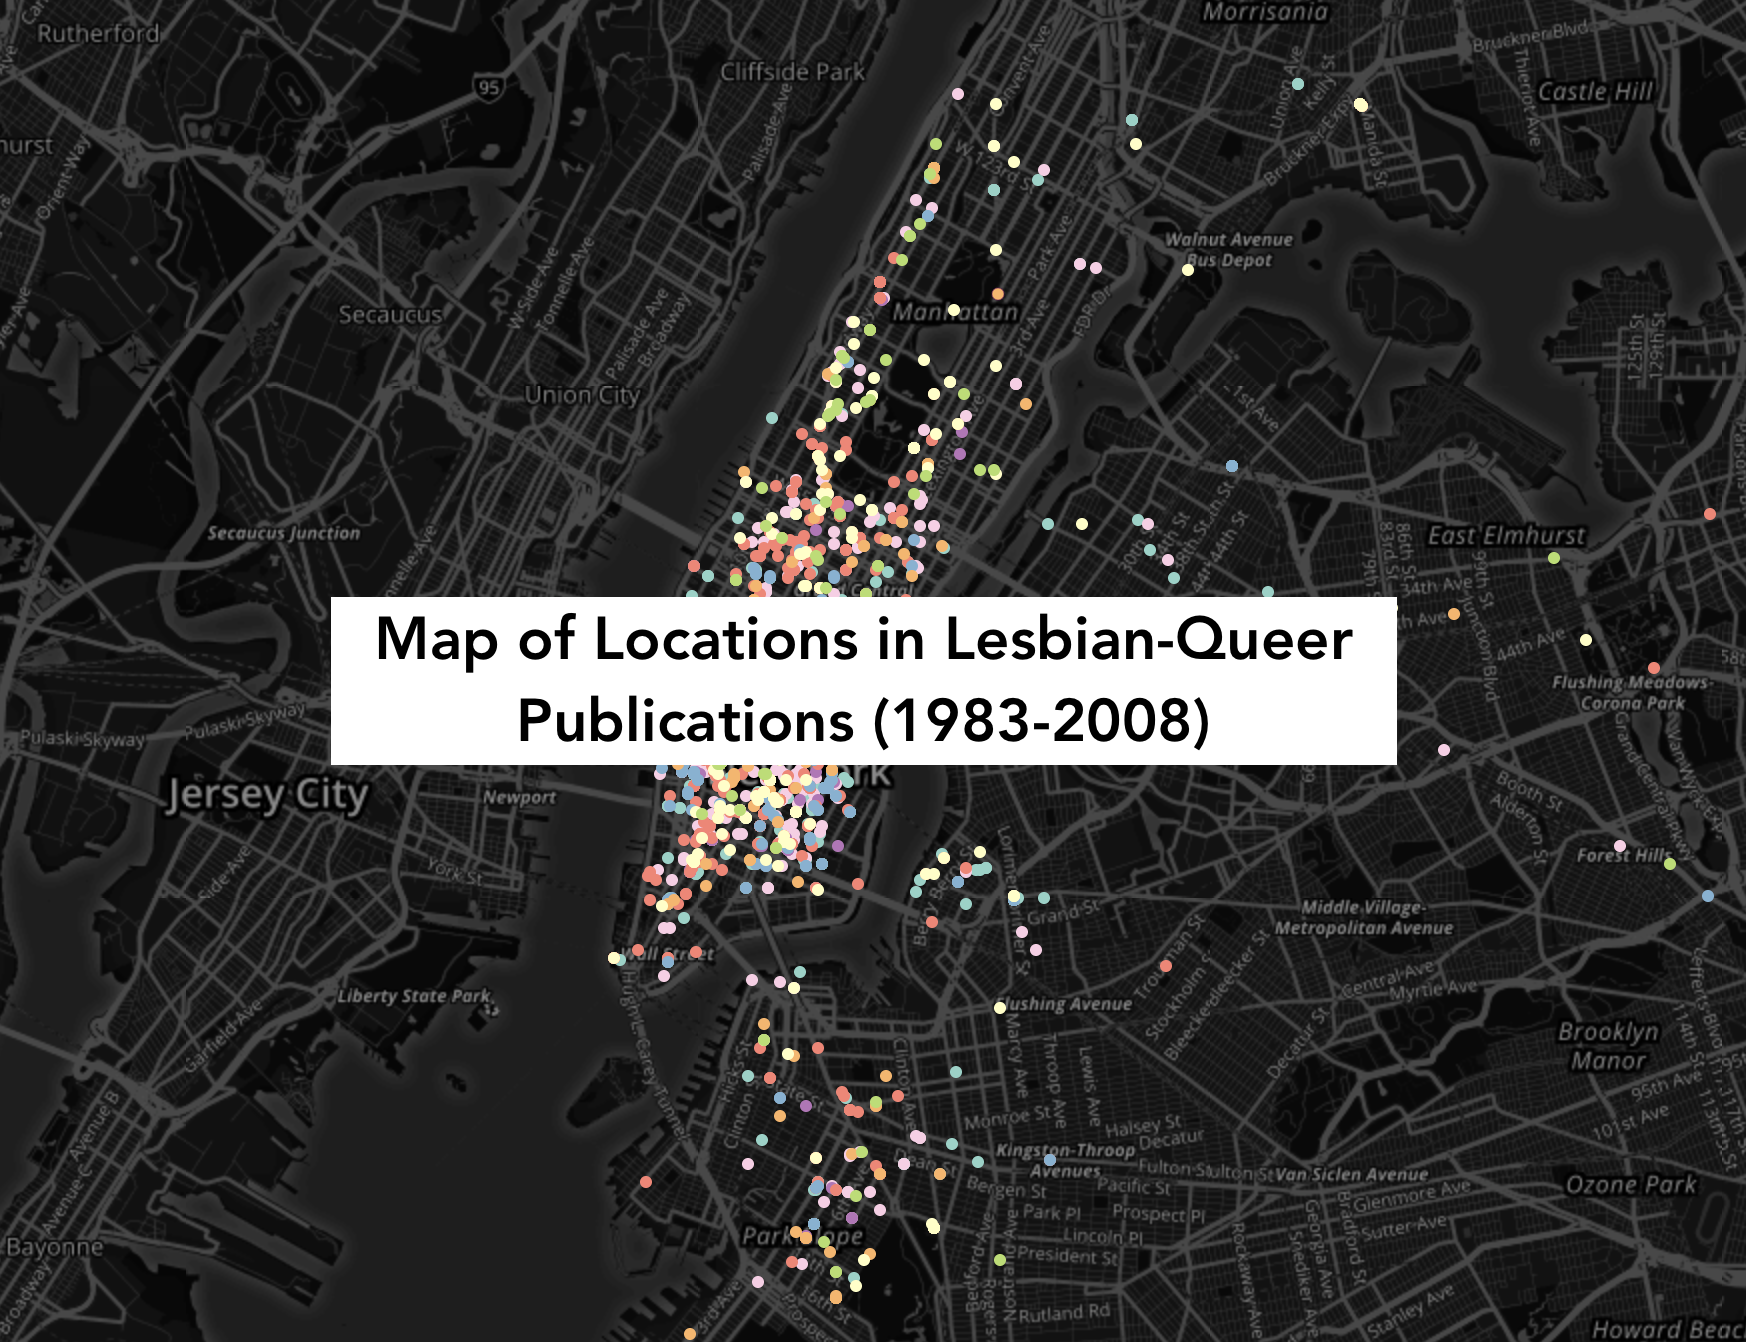 Map of Locations in Lesbian-Queer Publications (1983-2008)